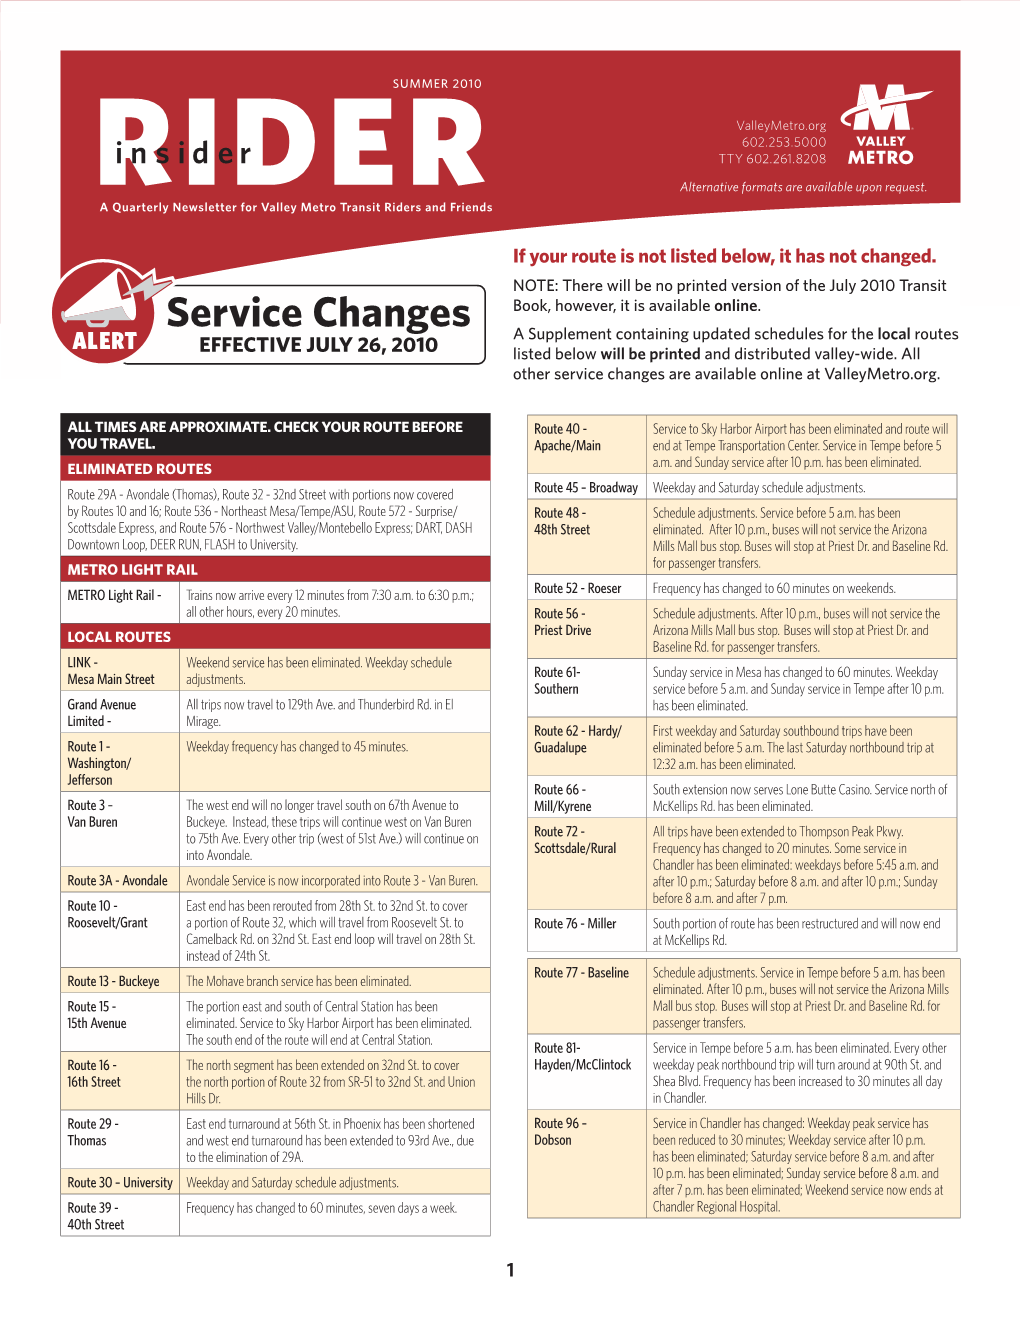 Service Changes Book, However, It Is Available Online